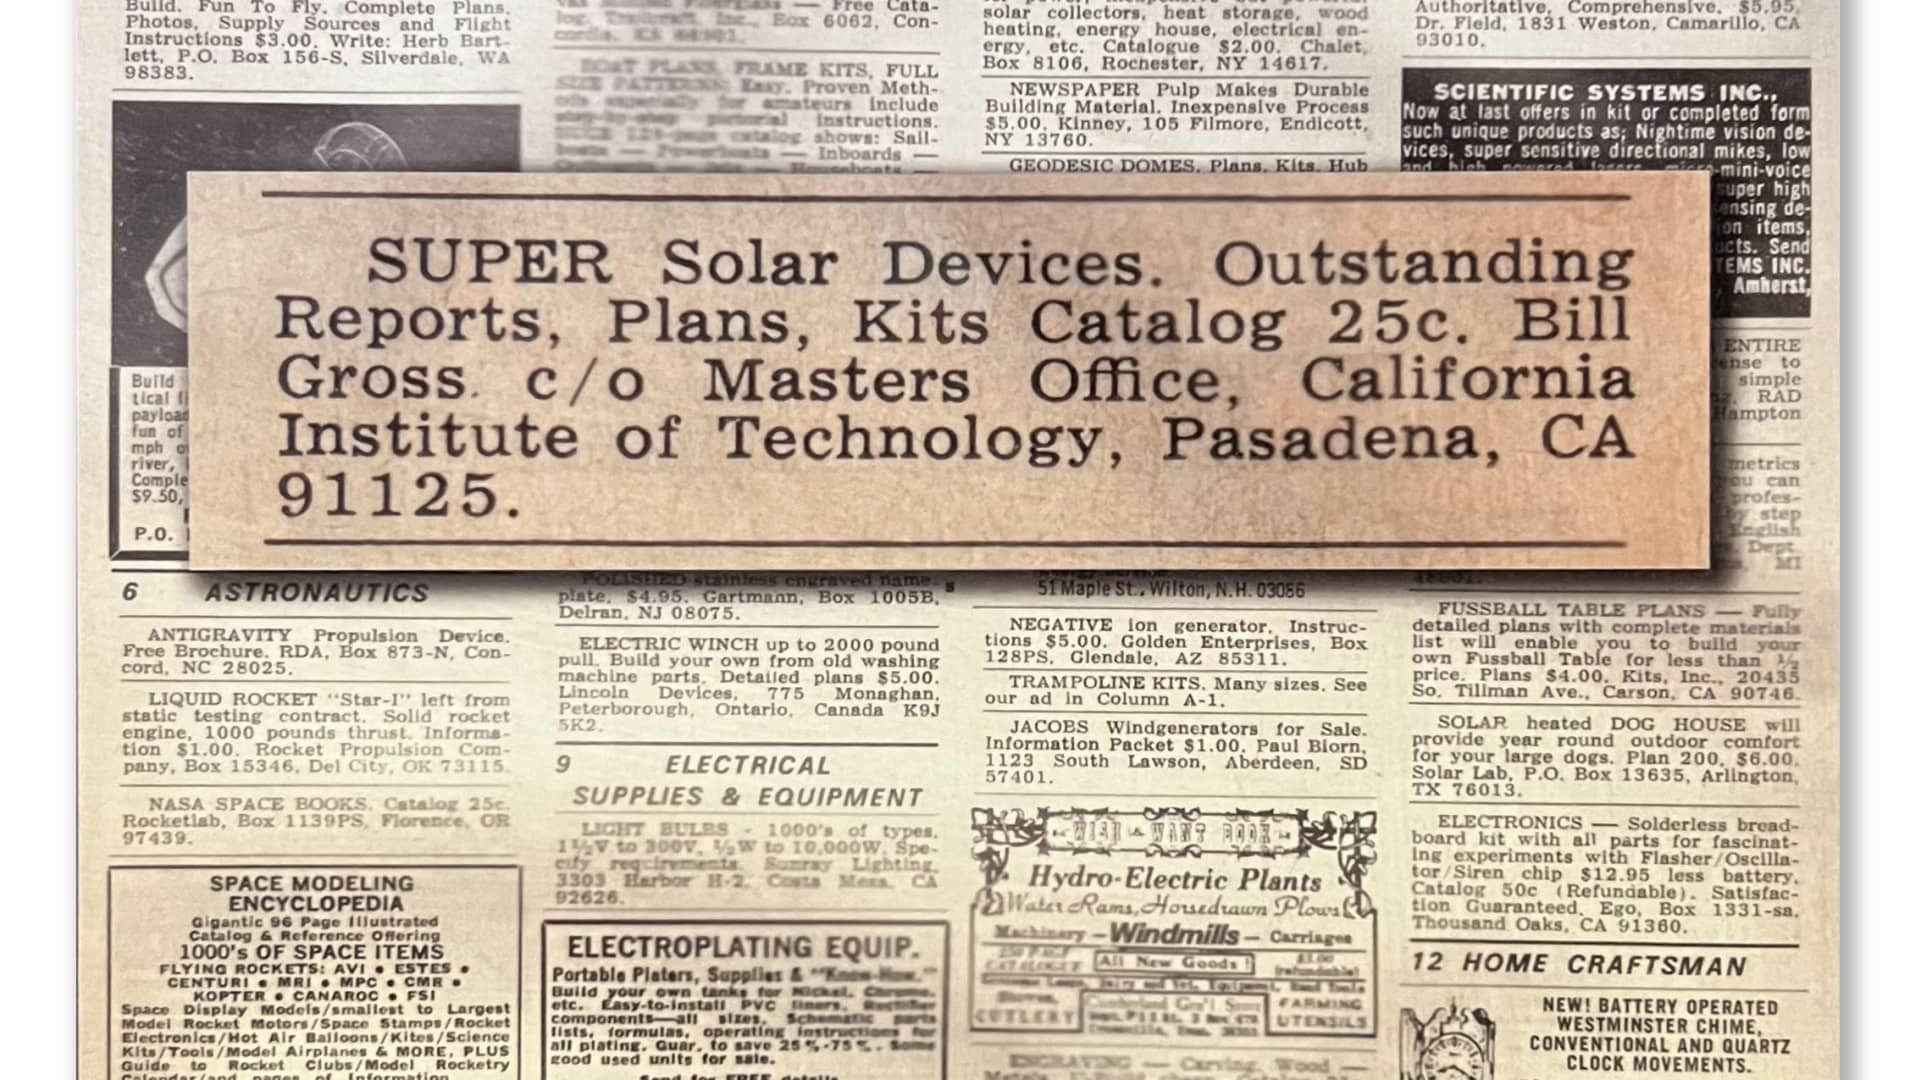 An advertisement that Bill Gross placed in the back of Popular Science magazine to advertise his solar devices company. The plans Gross sold were $4.00, but the ad says 25 cents to get a catalog, because he had a few different offerings. 